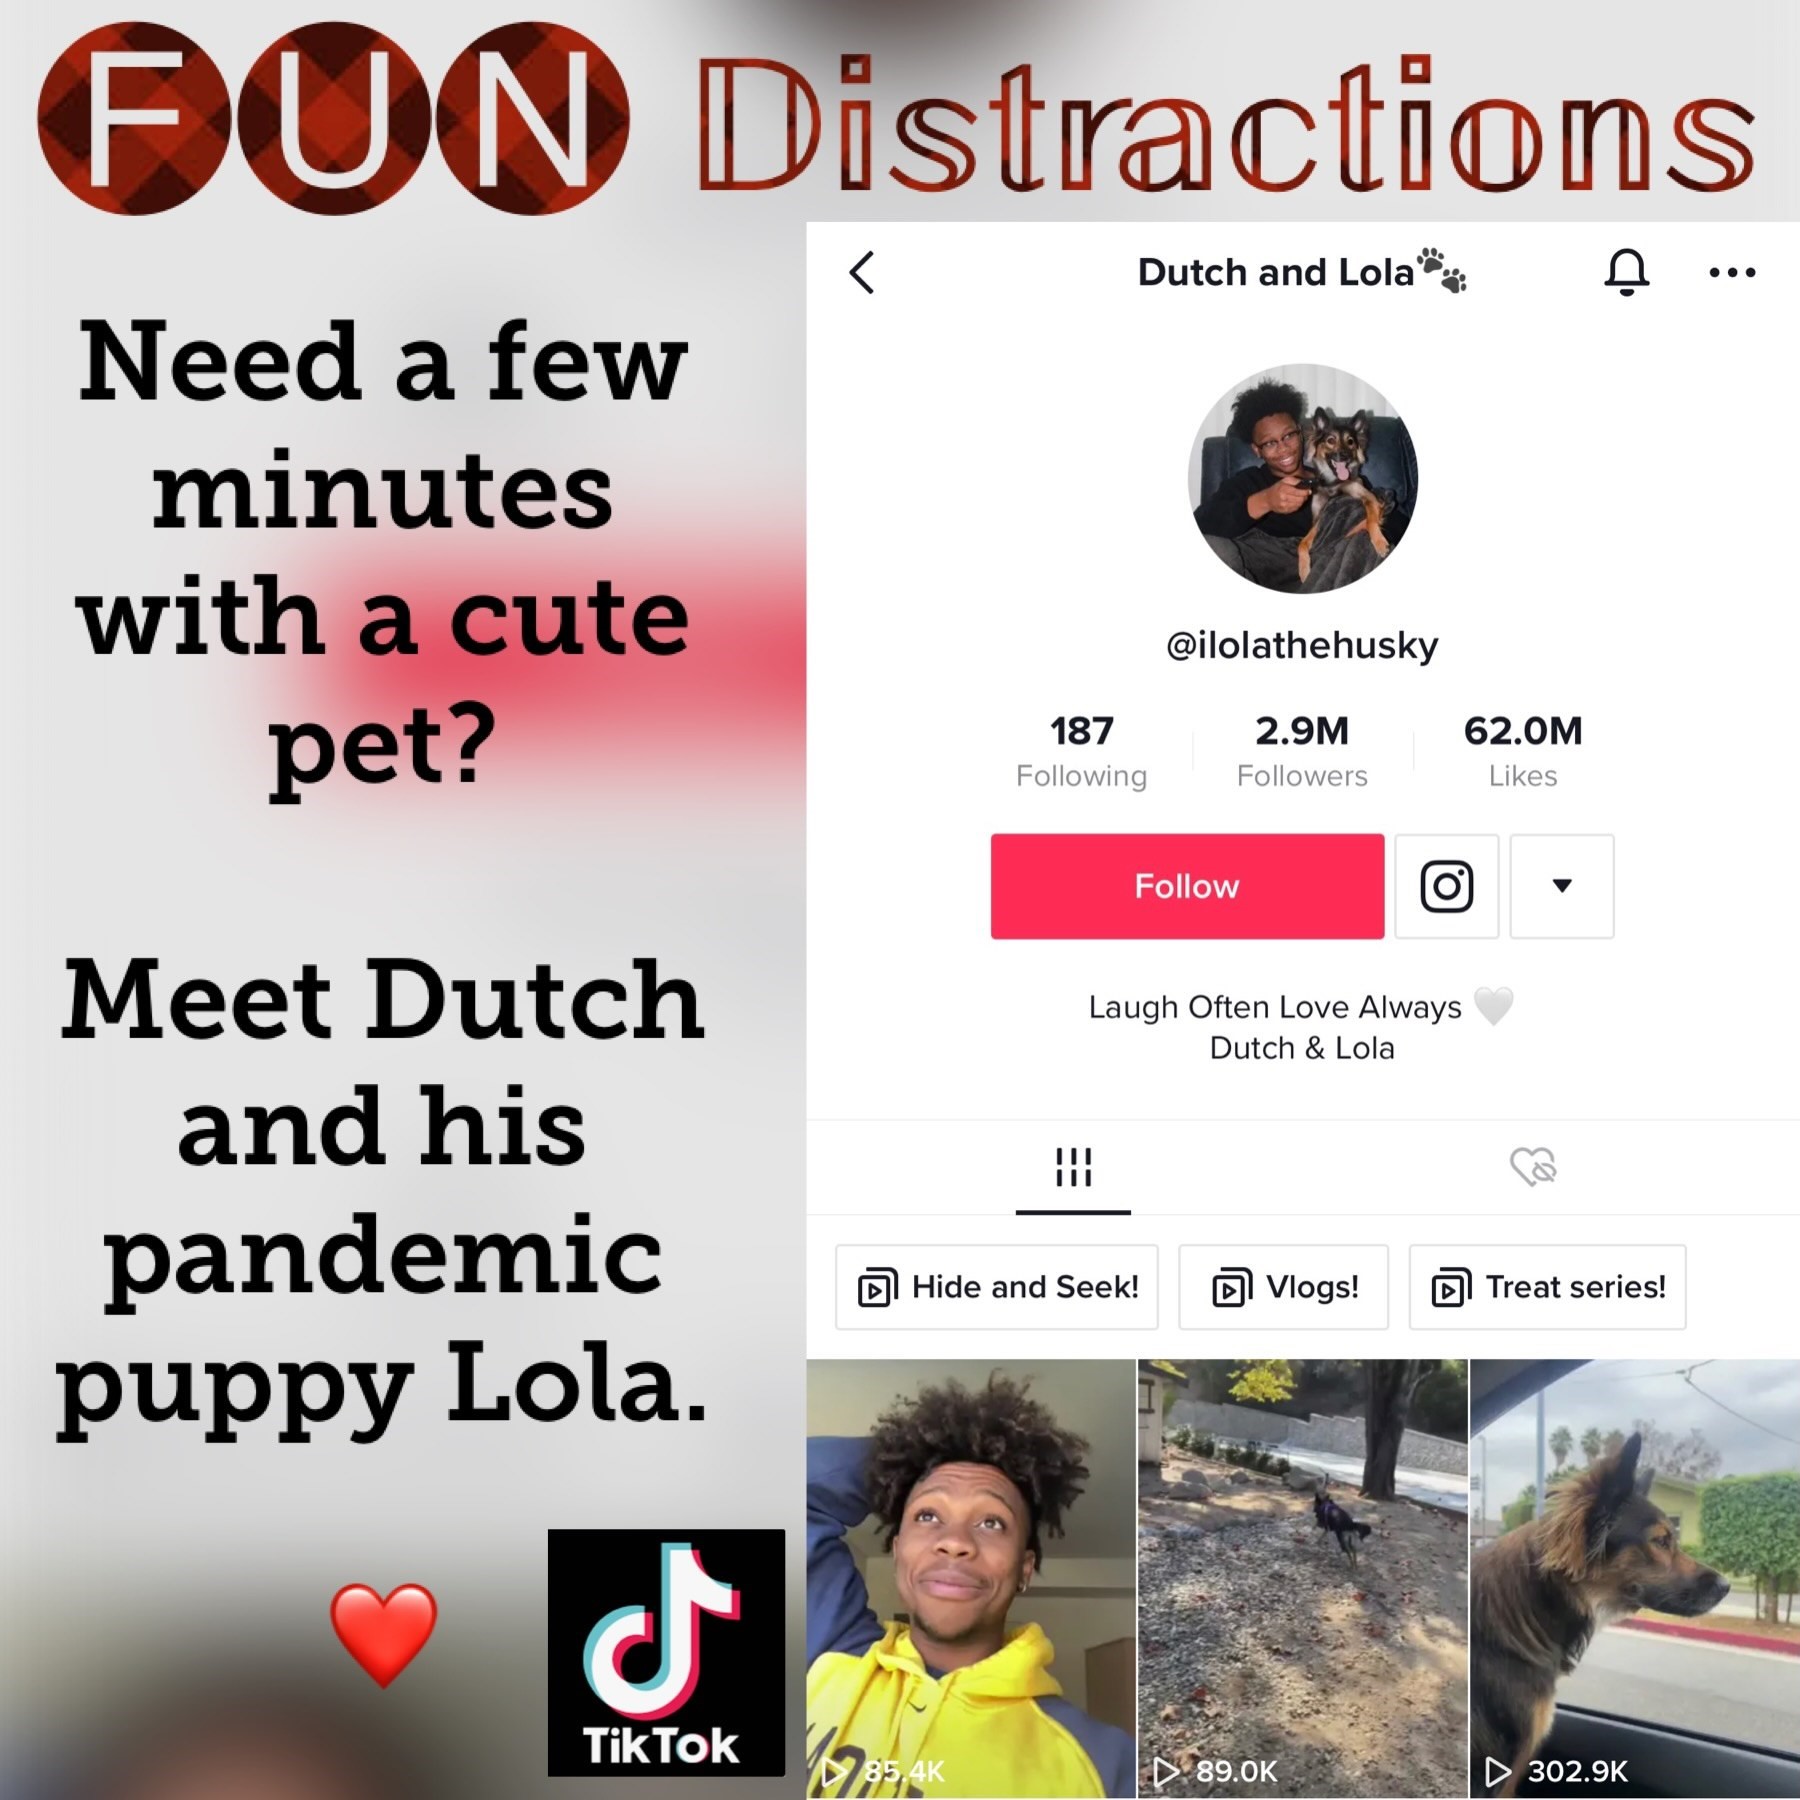 Image advertising the Library’s FUN Distractions series post about Dutch and Lola